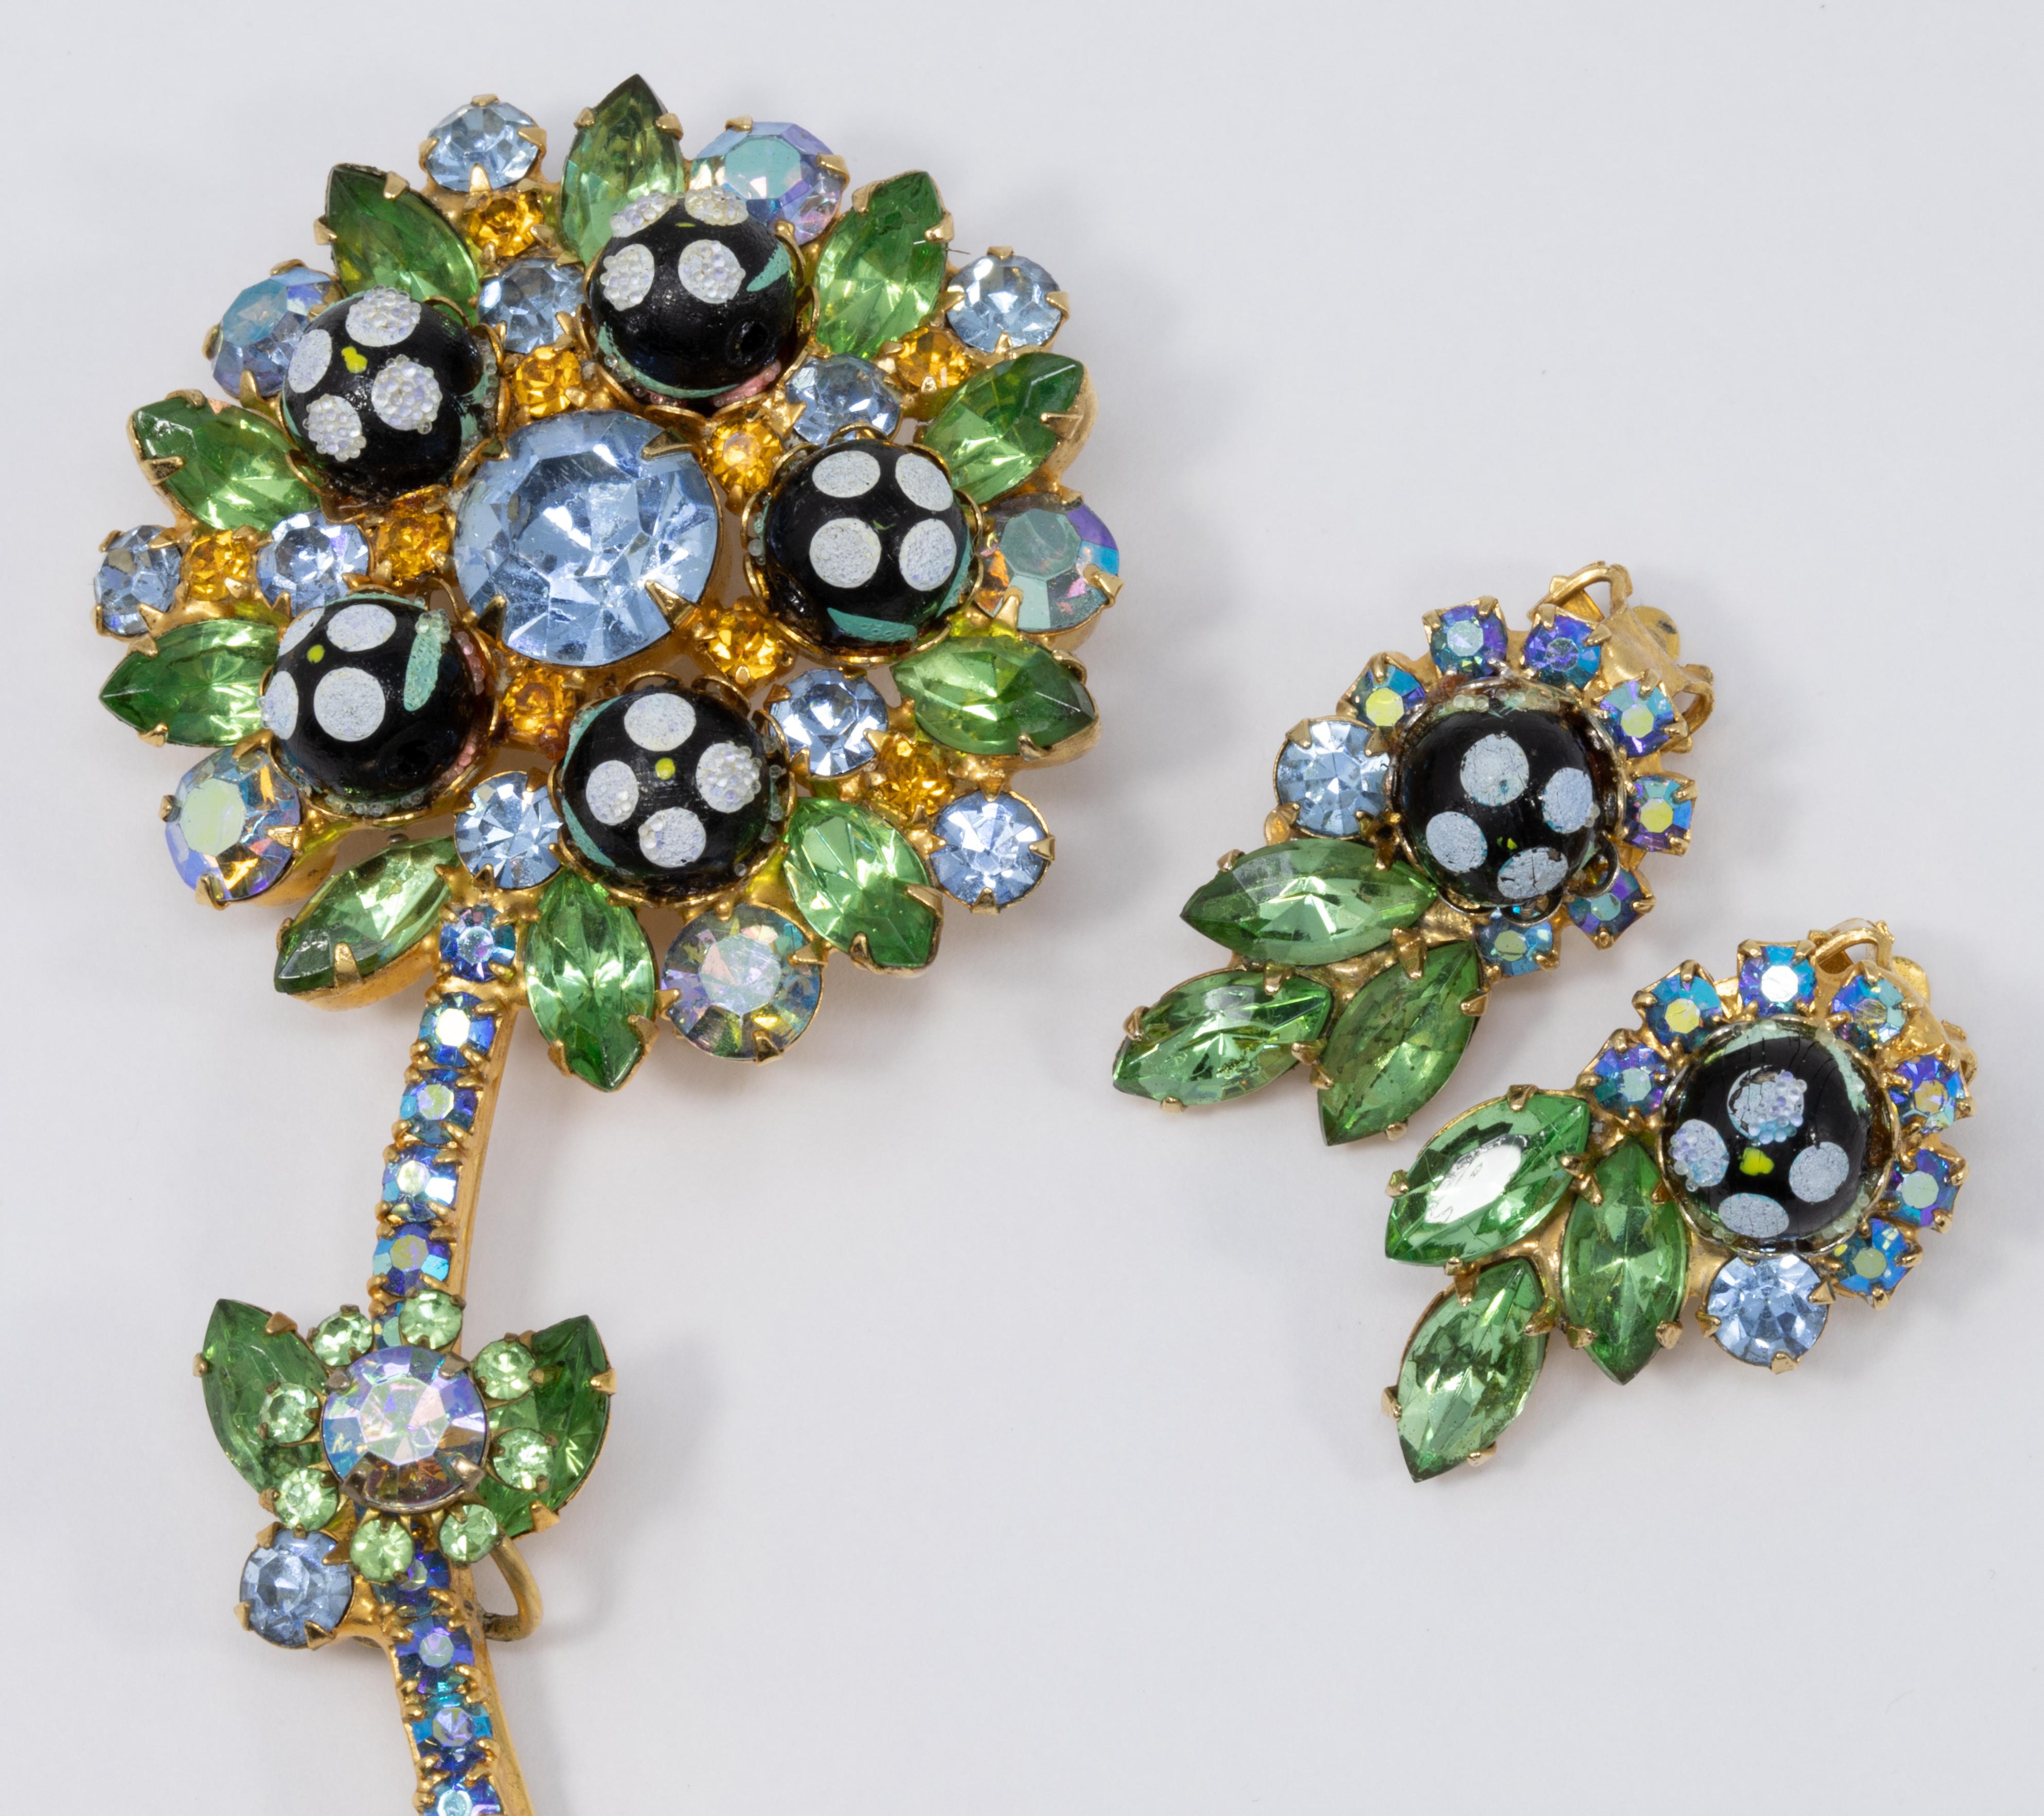 An exquisite brooch/pin and a pair of clip-on earrings by Juliana DeLizza & Elster. Each piece features paisley beads with a coralene finish, accented with green navette crystals, and ice-blue aurora borealis chatons. 

Pin: 8.5cm x 4.2cm
Earrings: